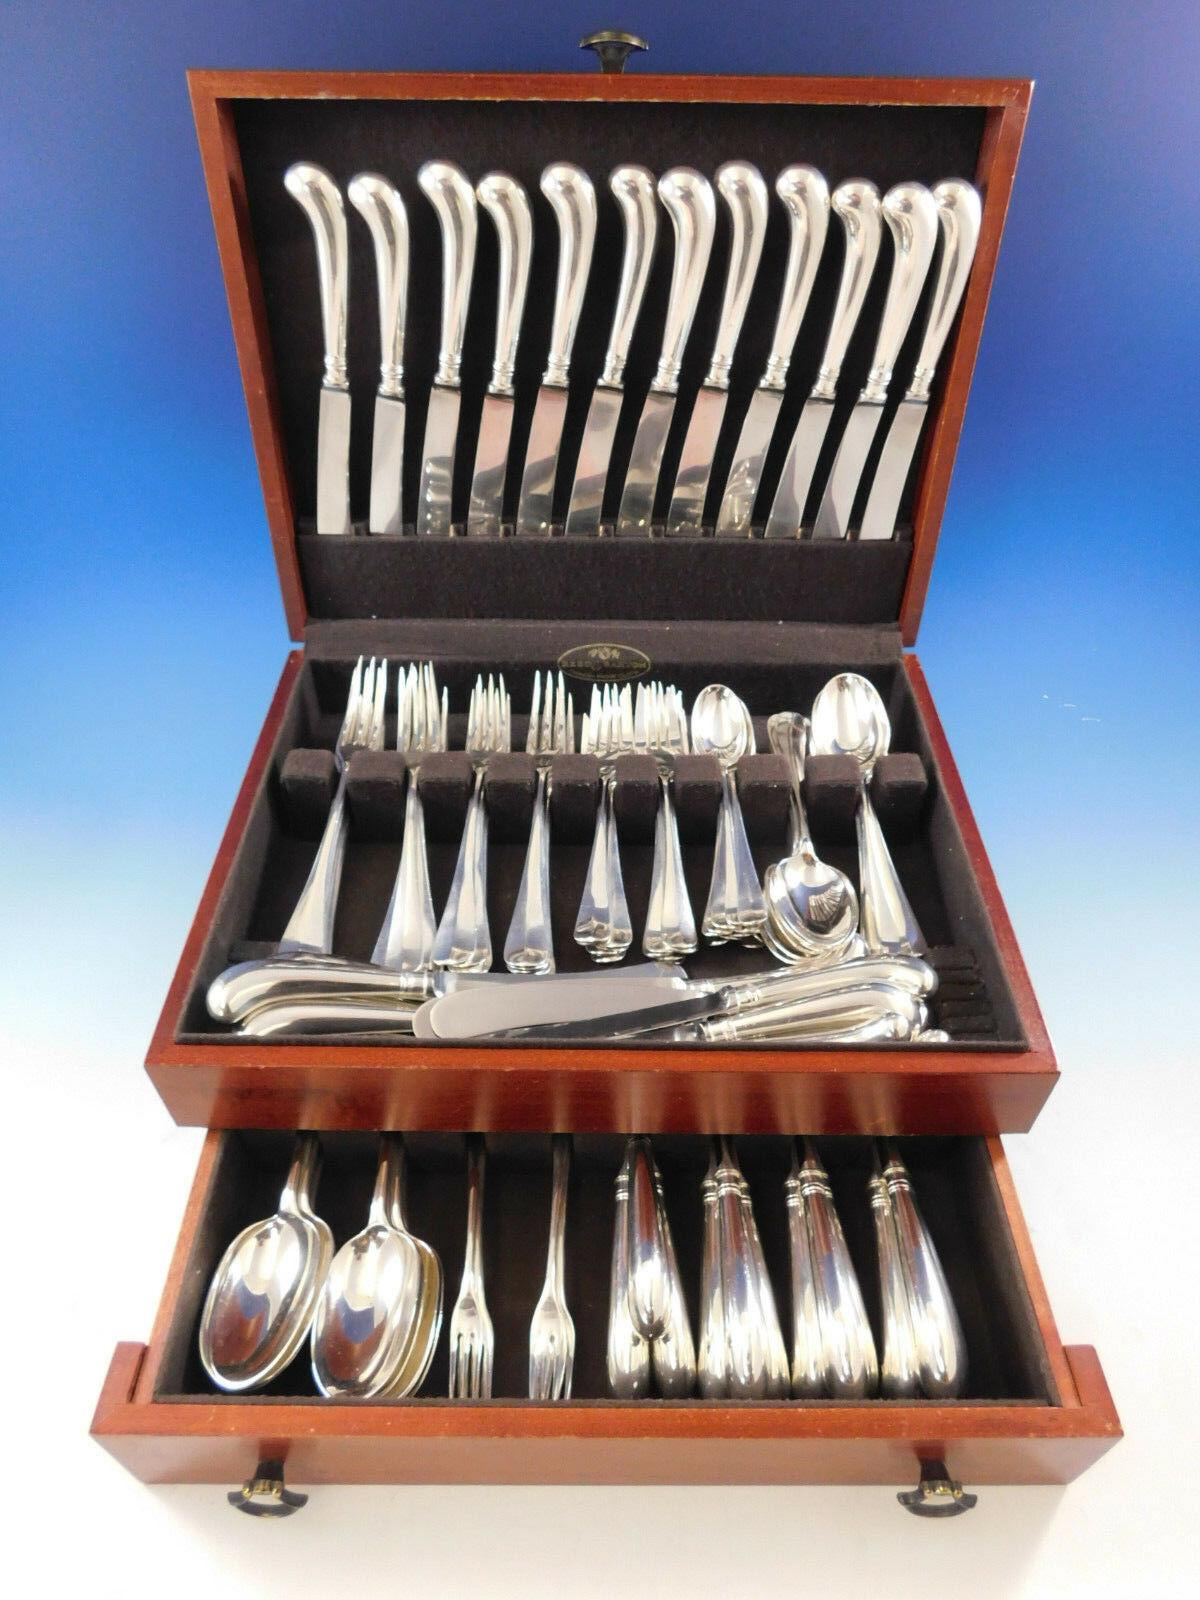 Superb Queen Anne by James Robinson Sterling Silver Flatware set, 120 pieces. This set includes:

12 Dinner Size Knives, wonderful pistol handles, 9 5/8